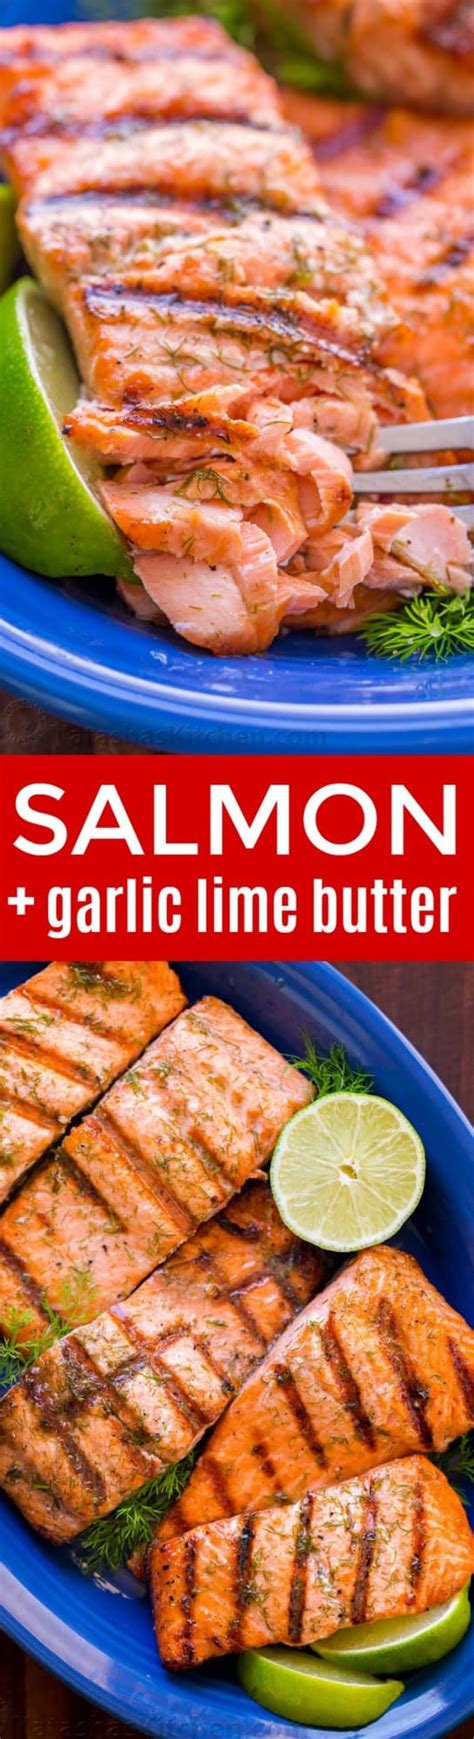 grilled-salmon-with-garlic-lime-butter-video image